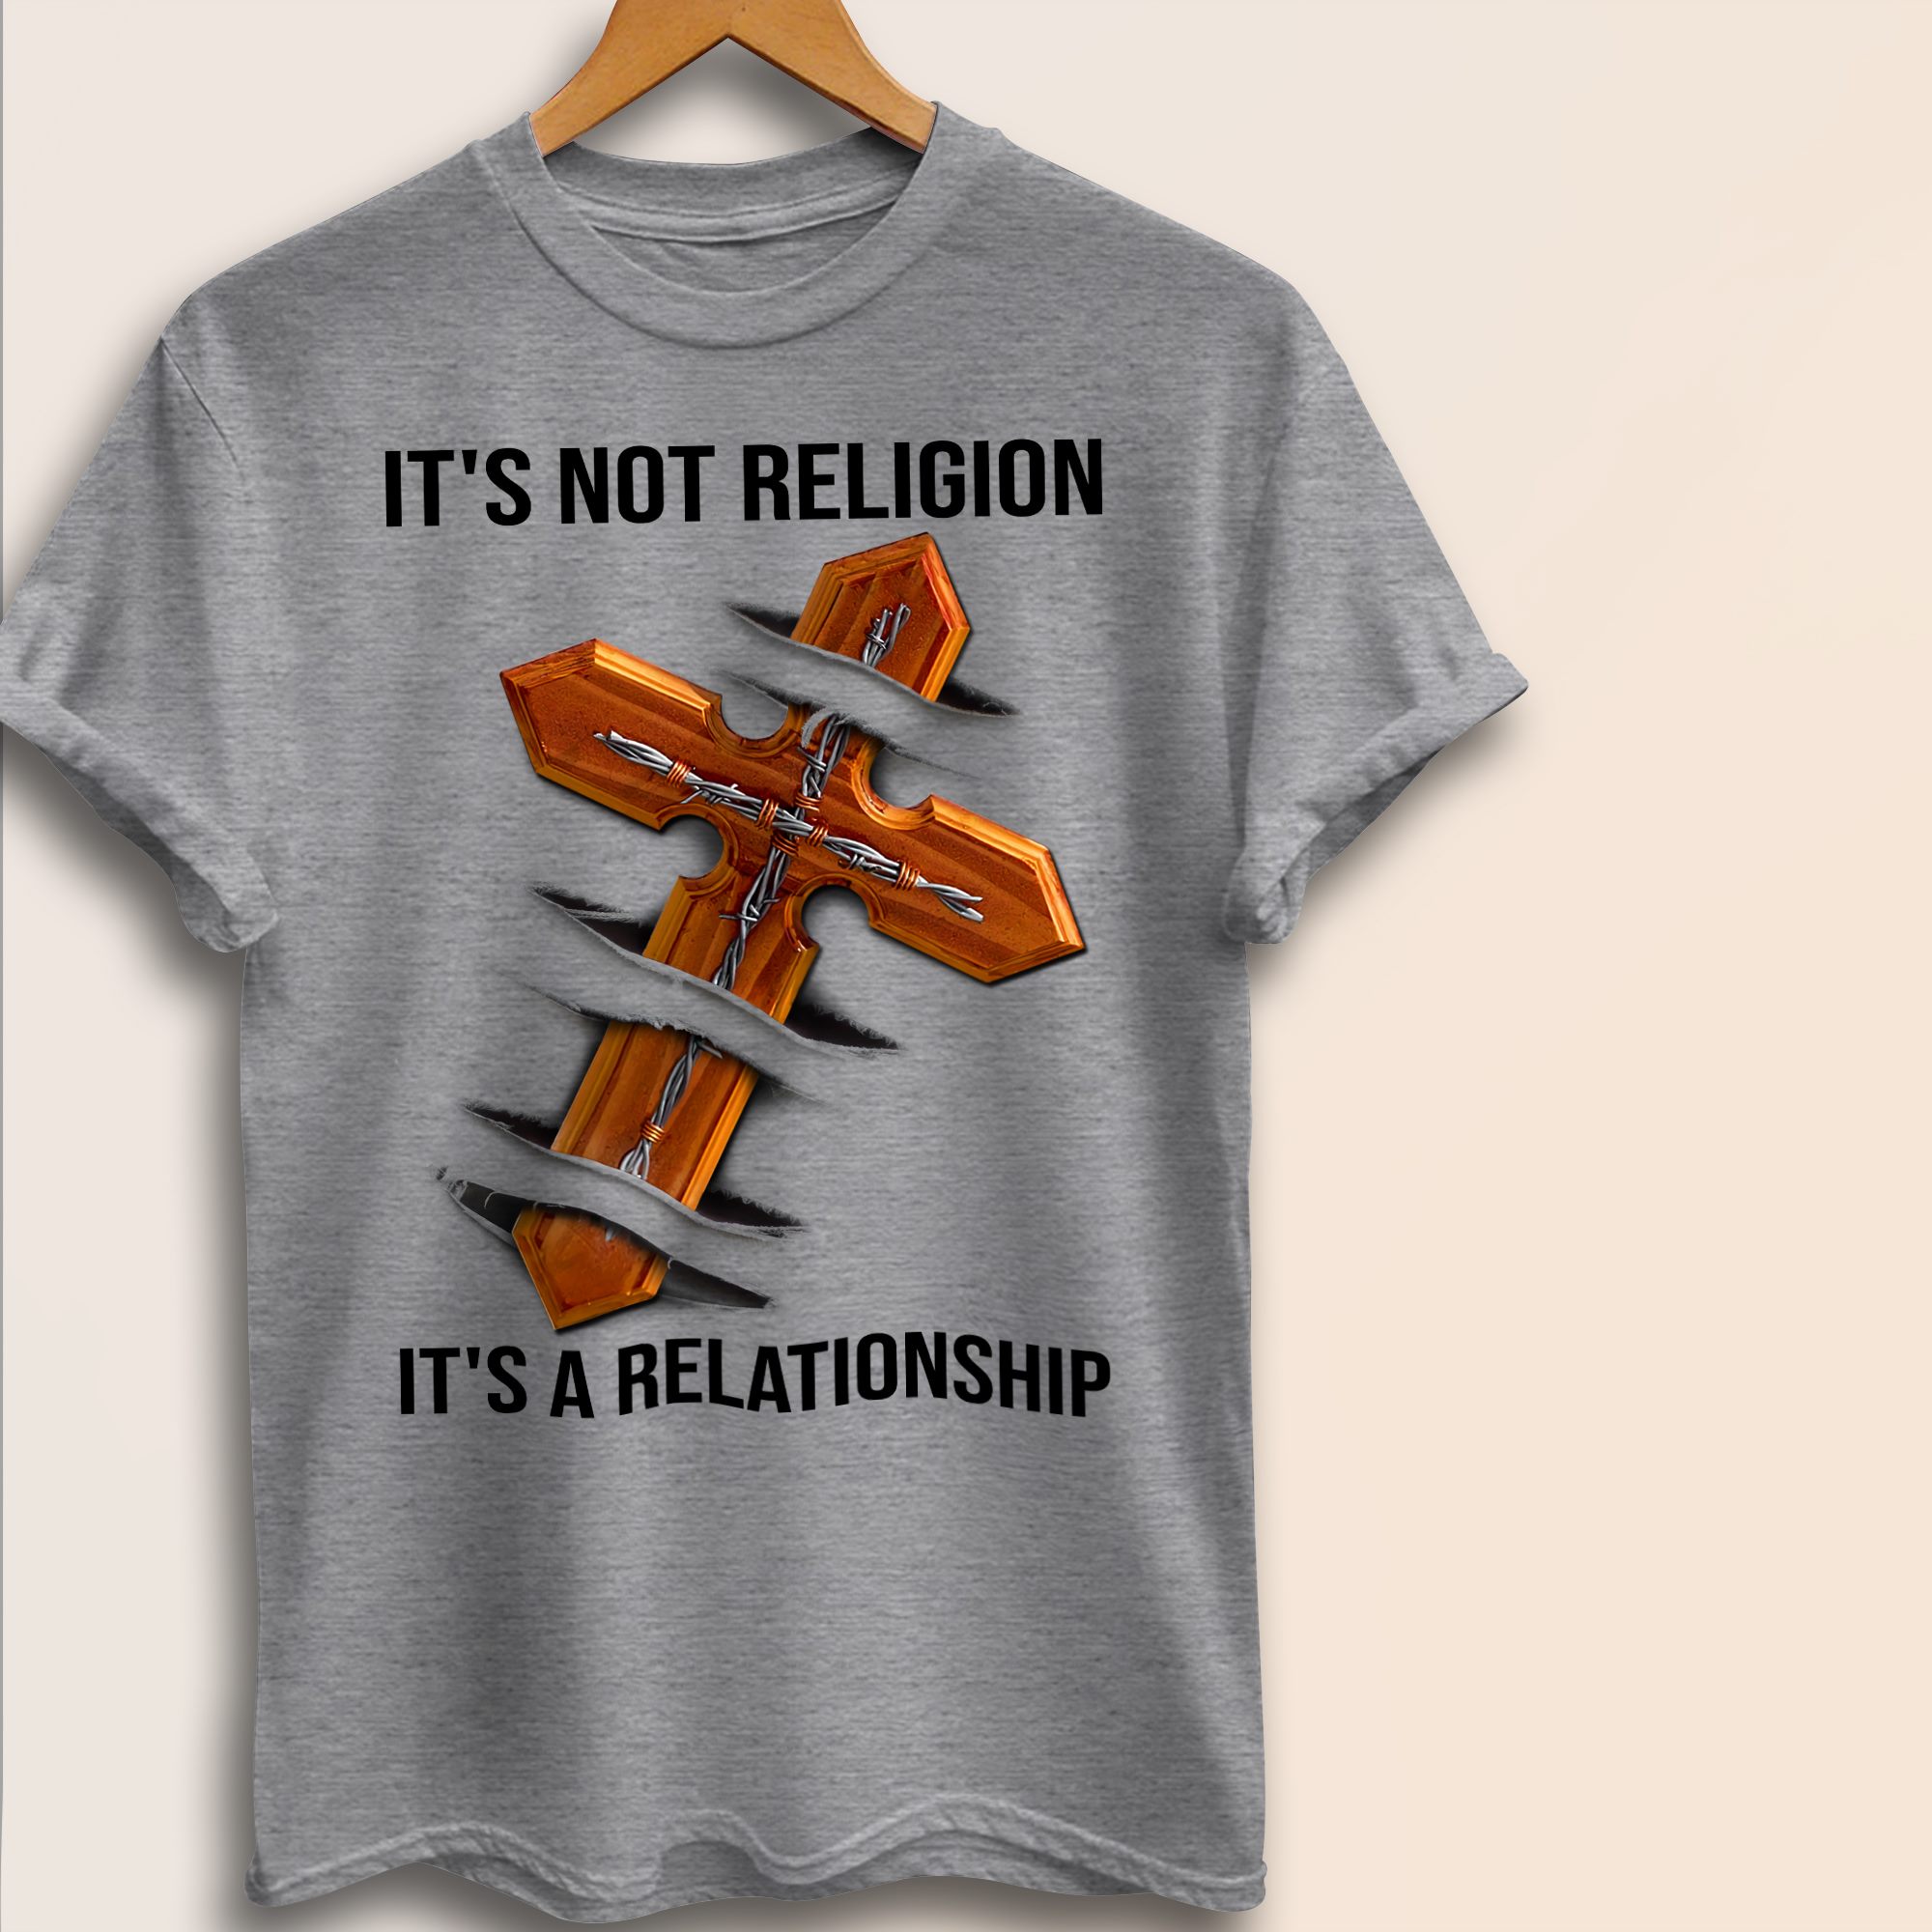 God’s Cross - It’s not religion It’s a relationship